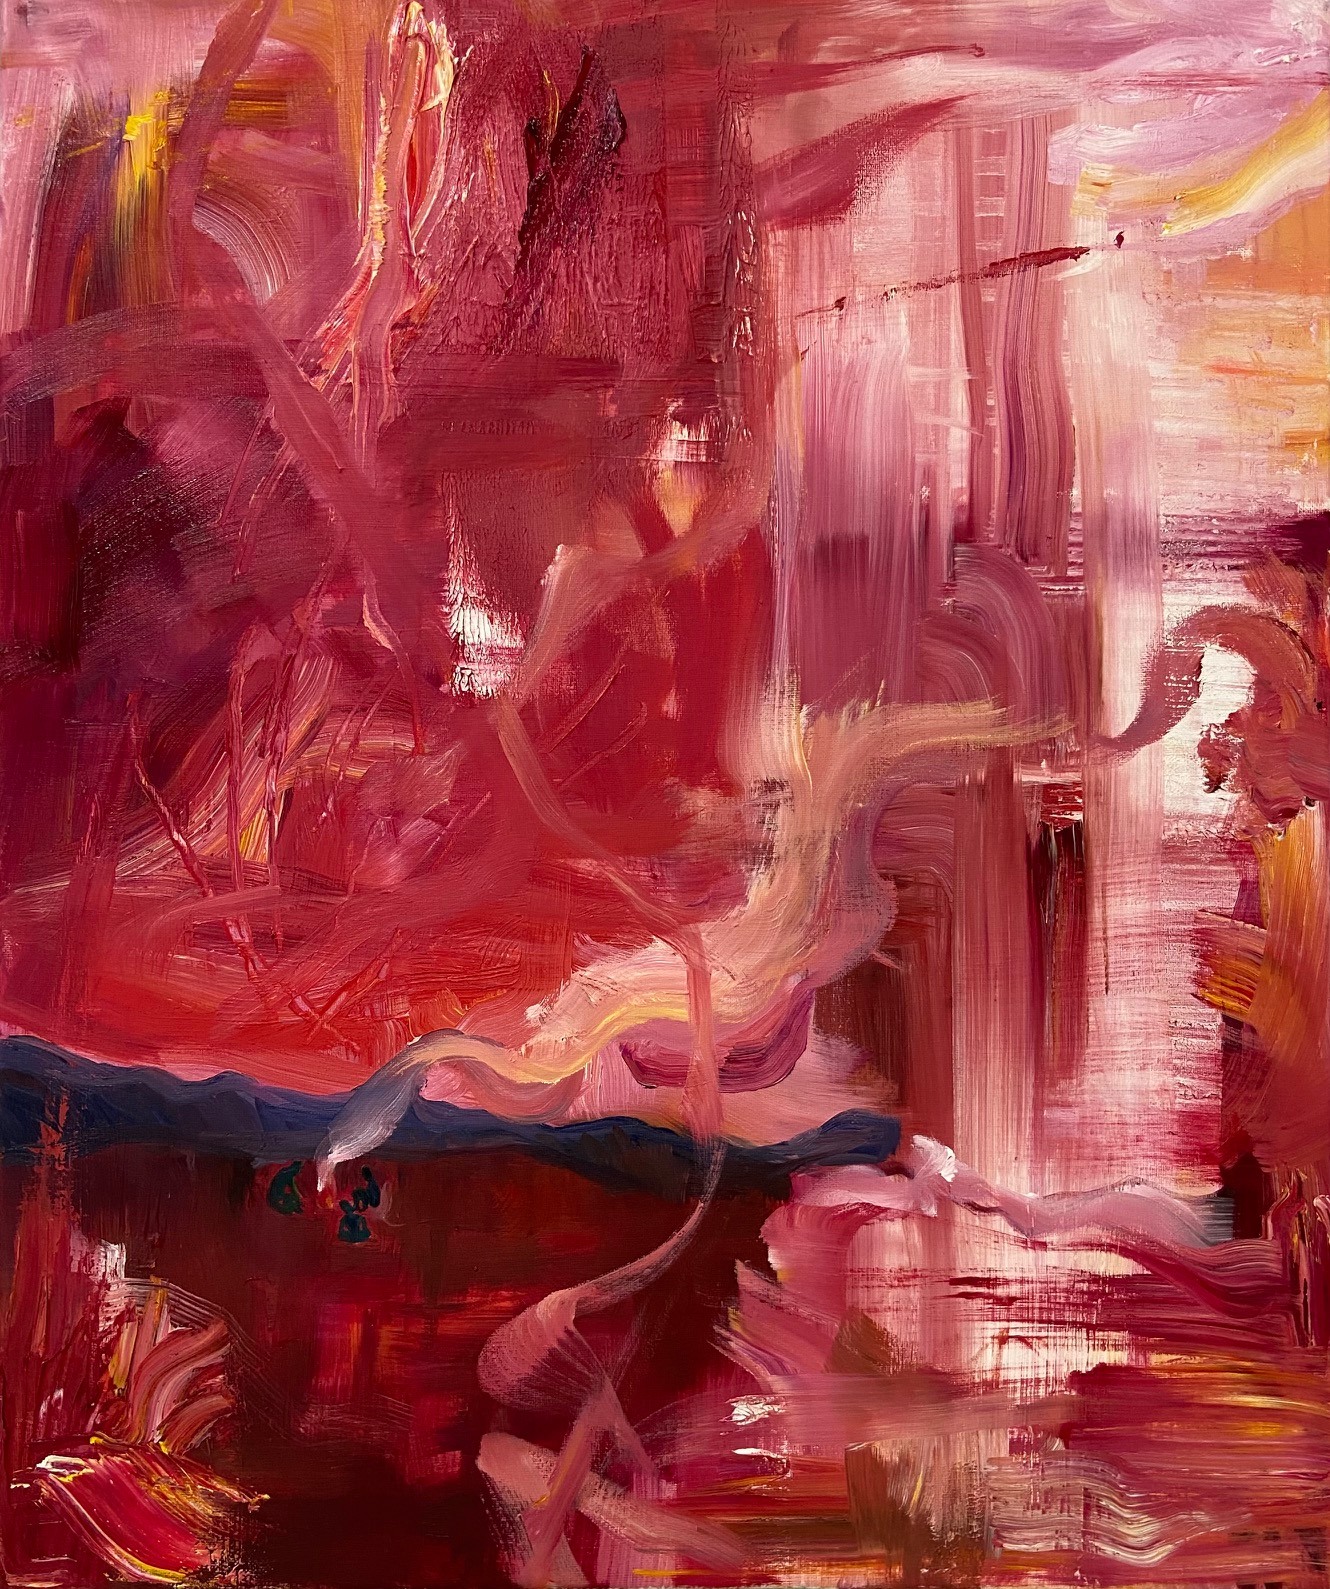 An abstract painting in red and pink